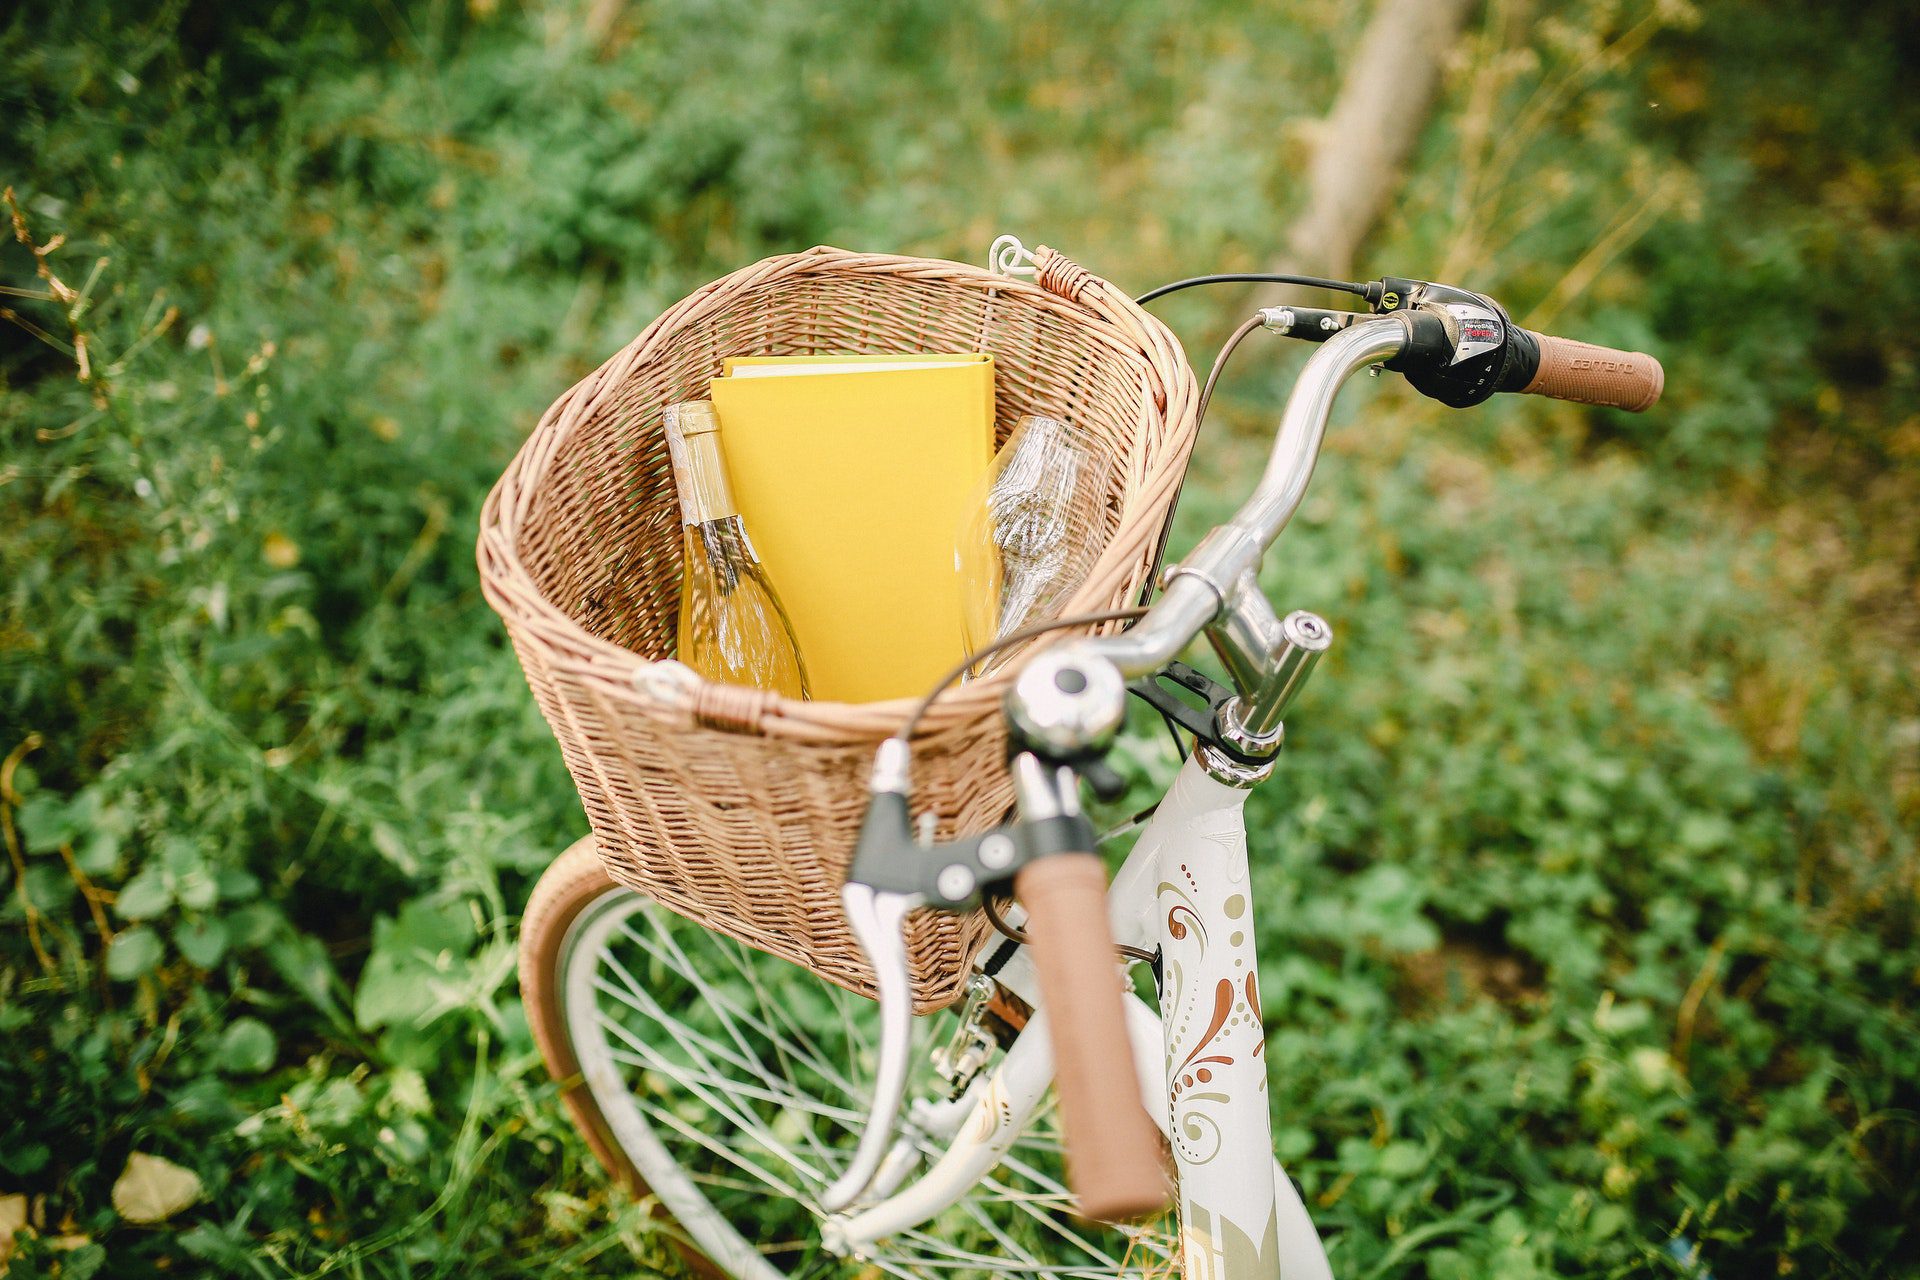 white bicycle with a basket on the front carrying wine and a wine glass for a biking wine tour in Summerland